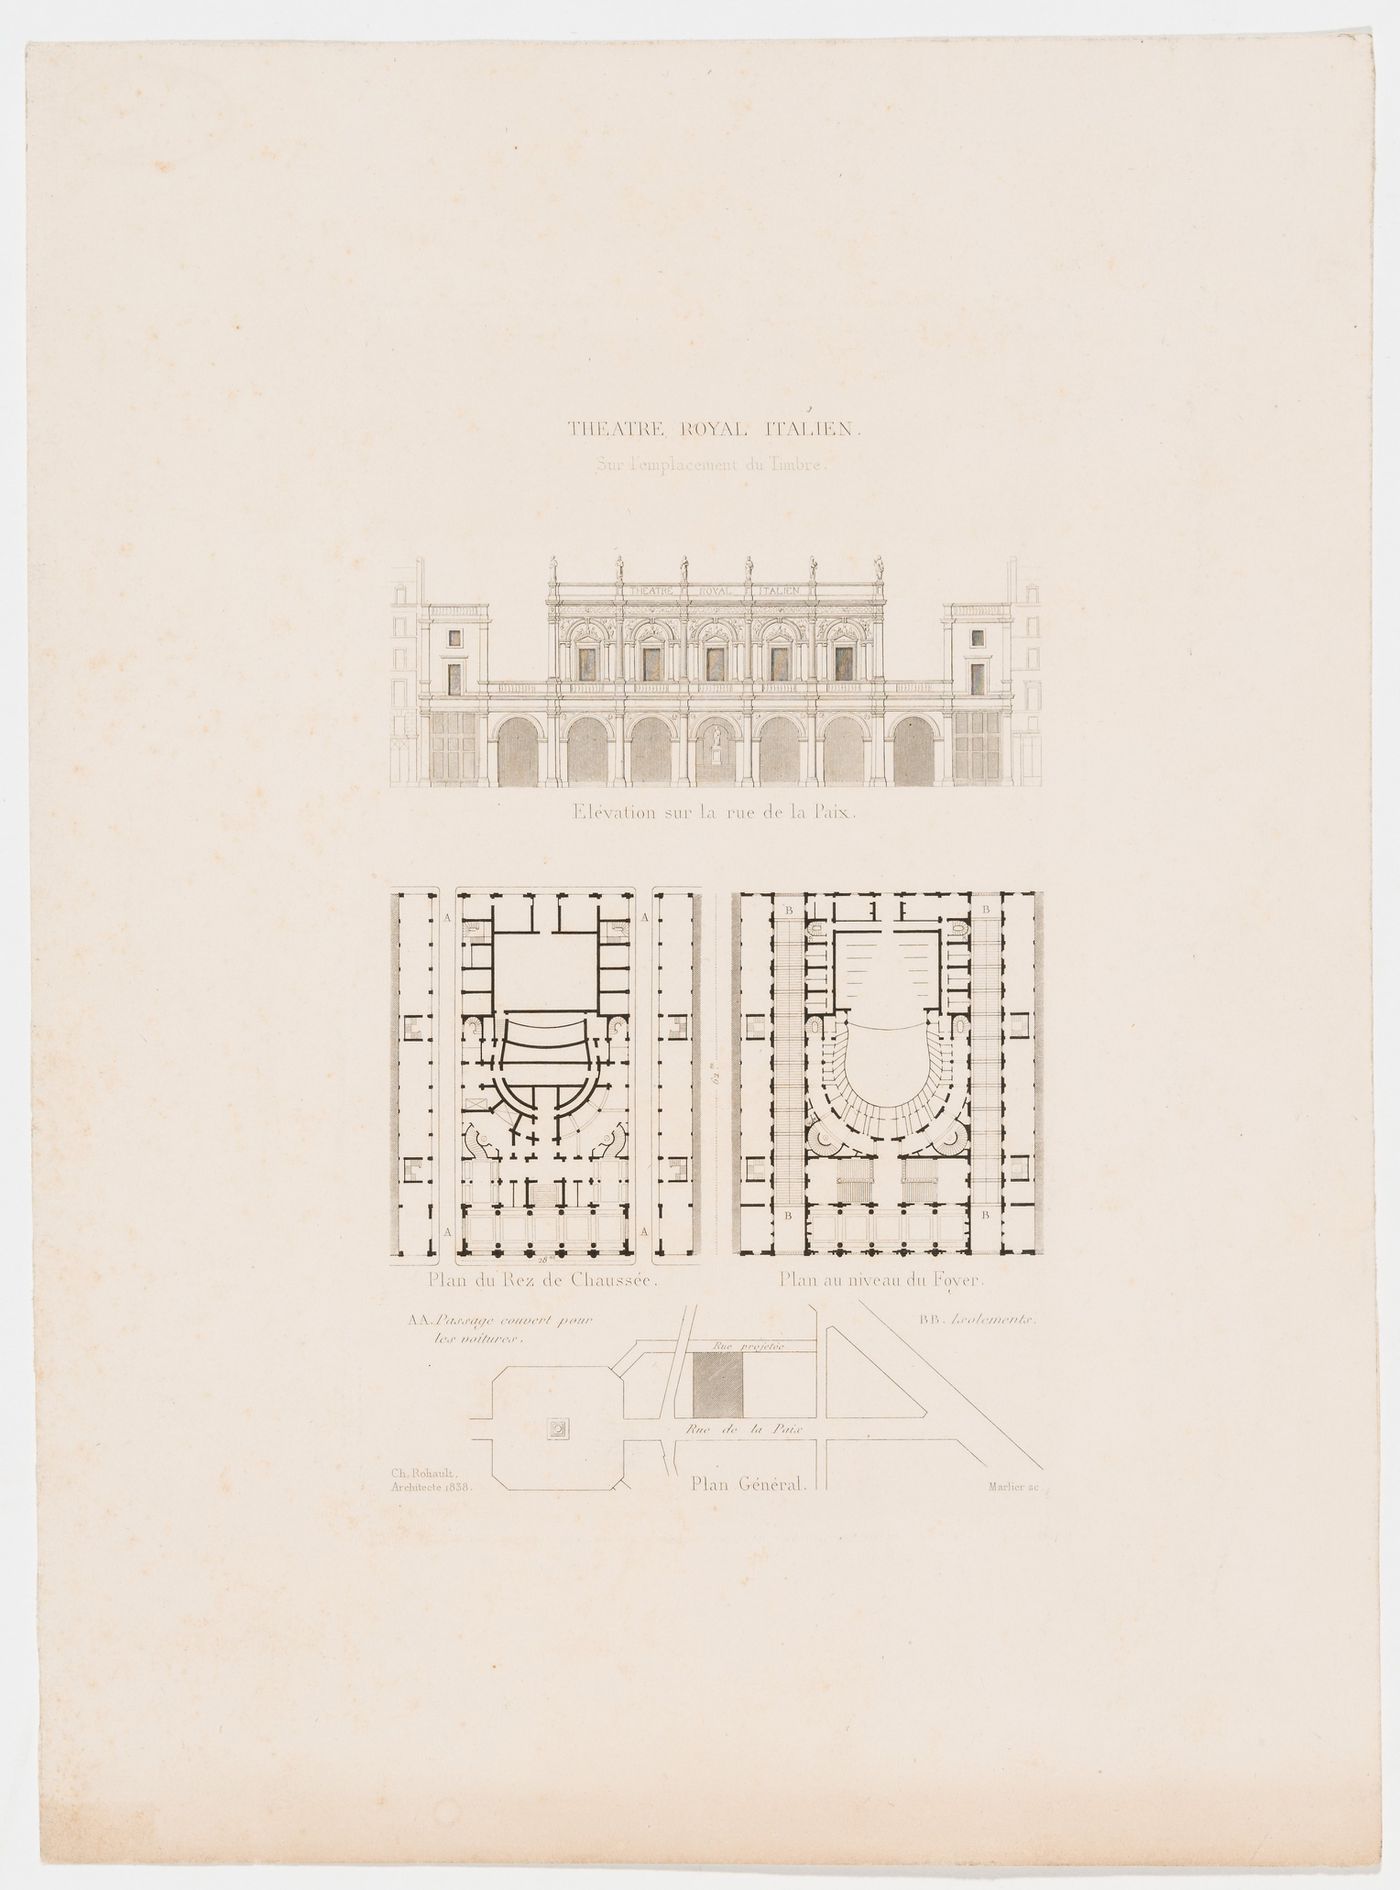 Elevation for the principal façade for the Théâtre Royal Italian, with a site plan and ground and "niveau du foyer" plans